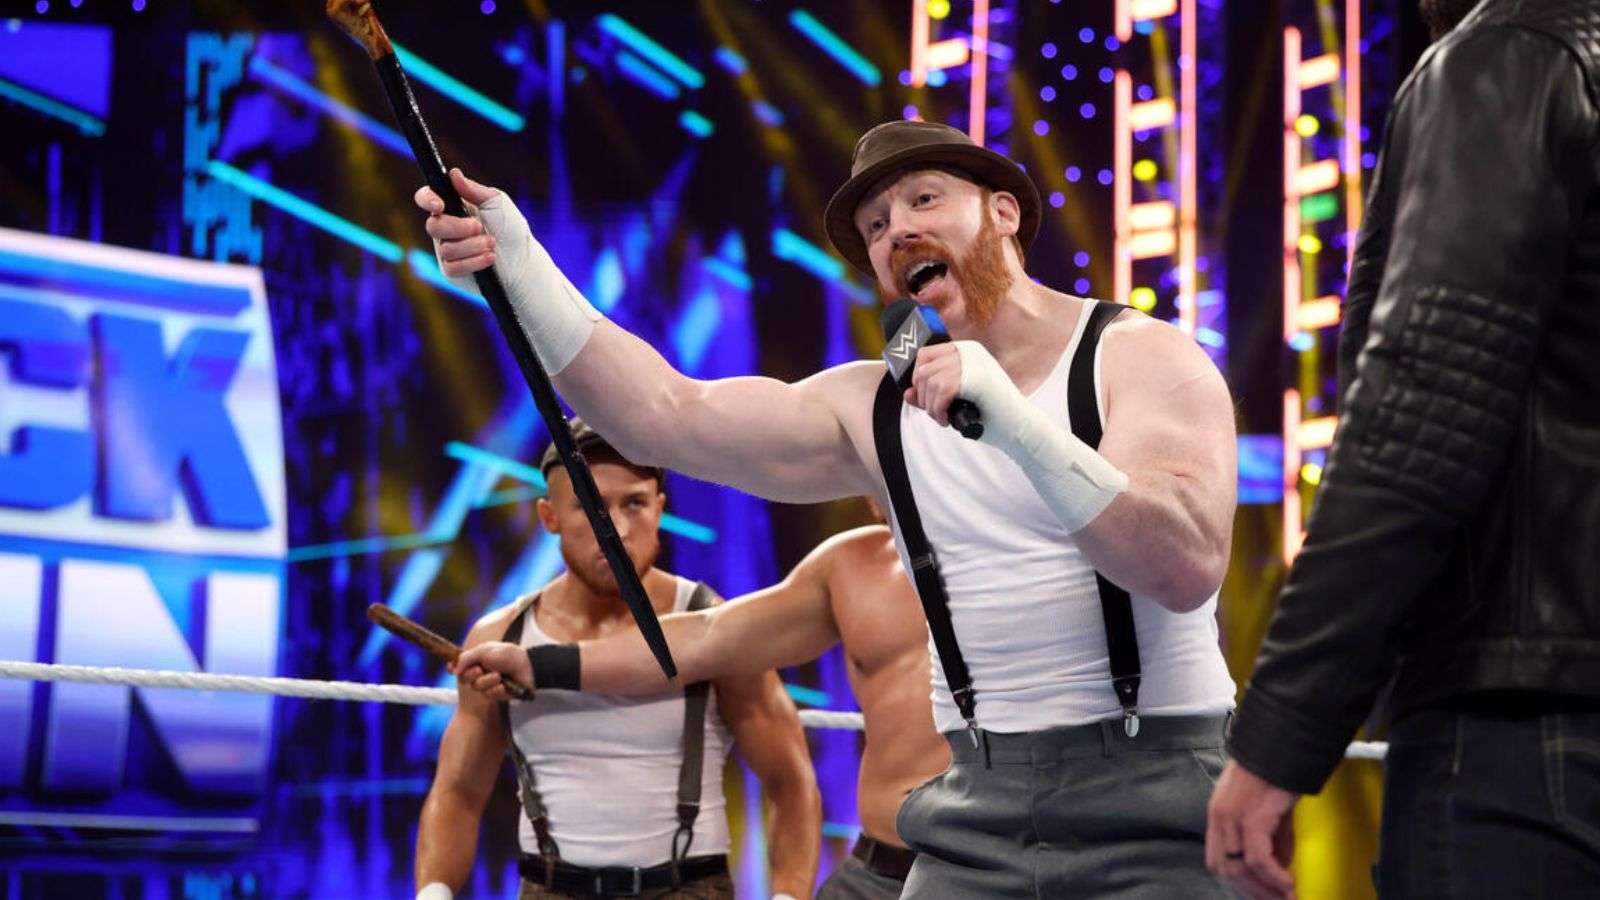 Sheamus in the ring as a member of the WWE.